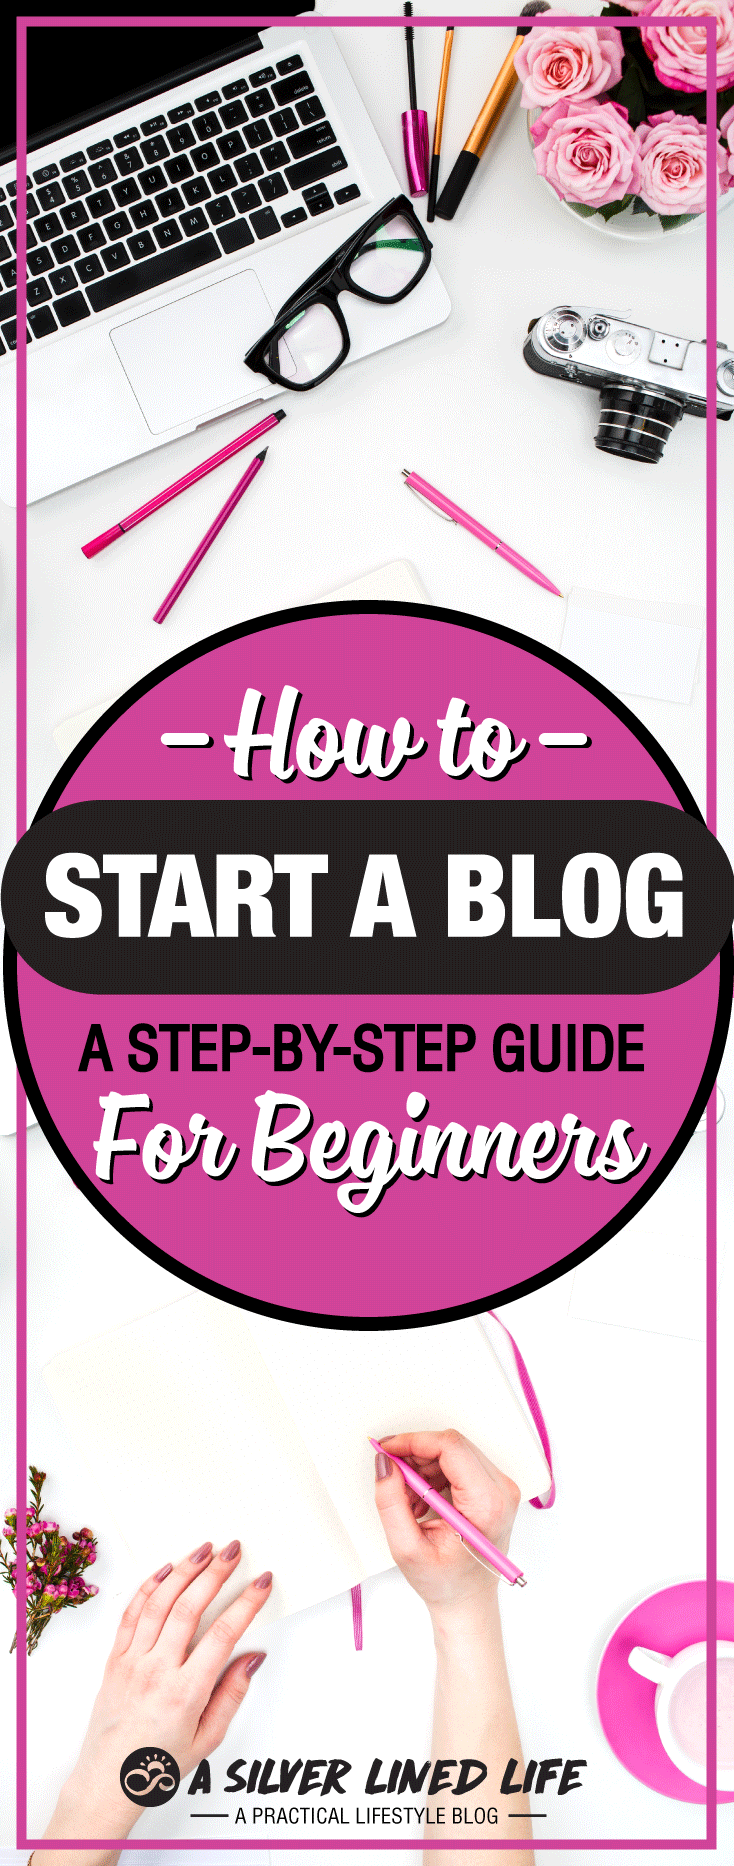 How to Start a Blog, a Step-by-Step Guide for Beginners: make money blogging on WordPress quickly! 